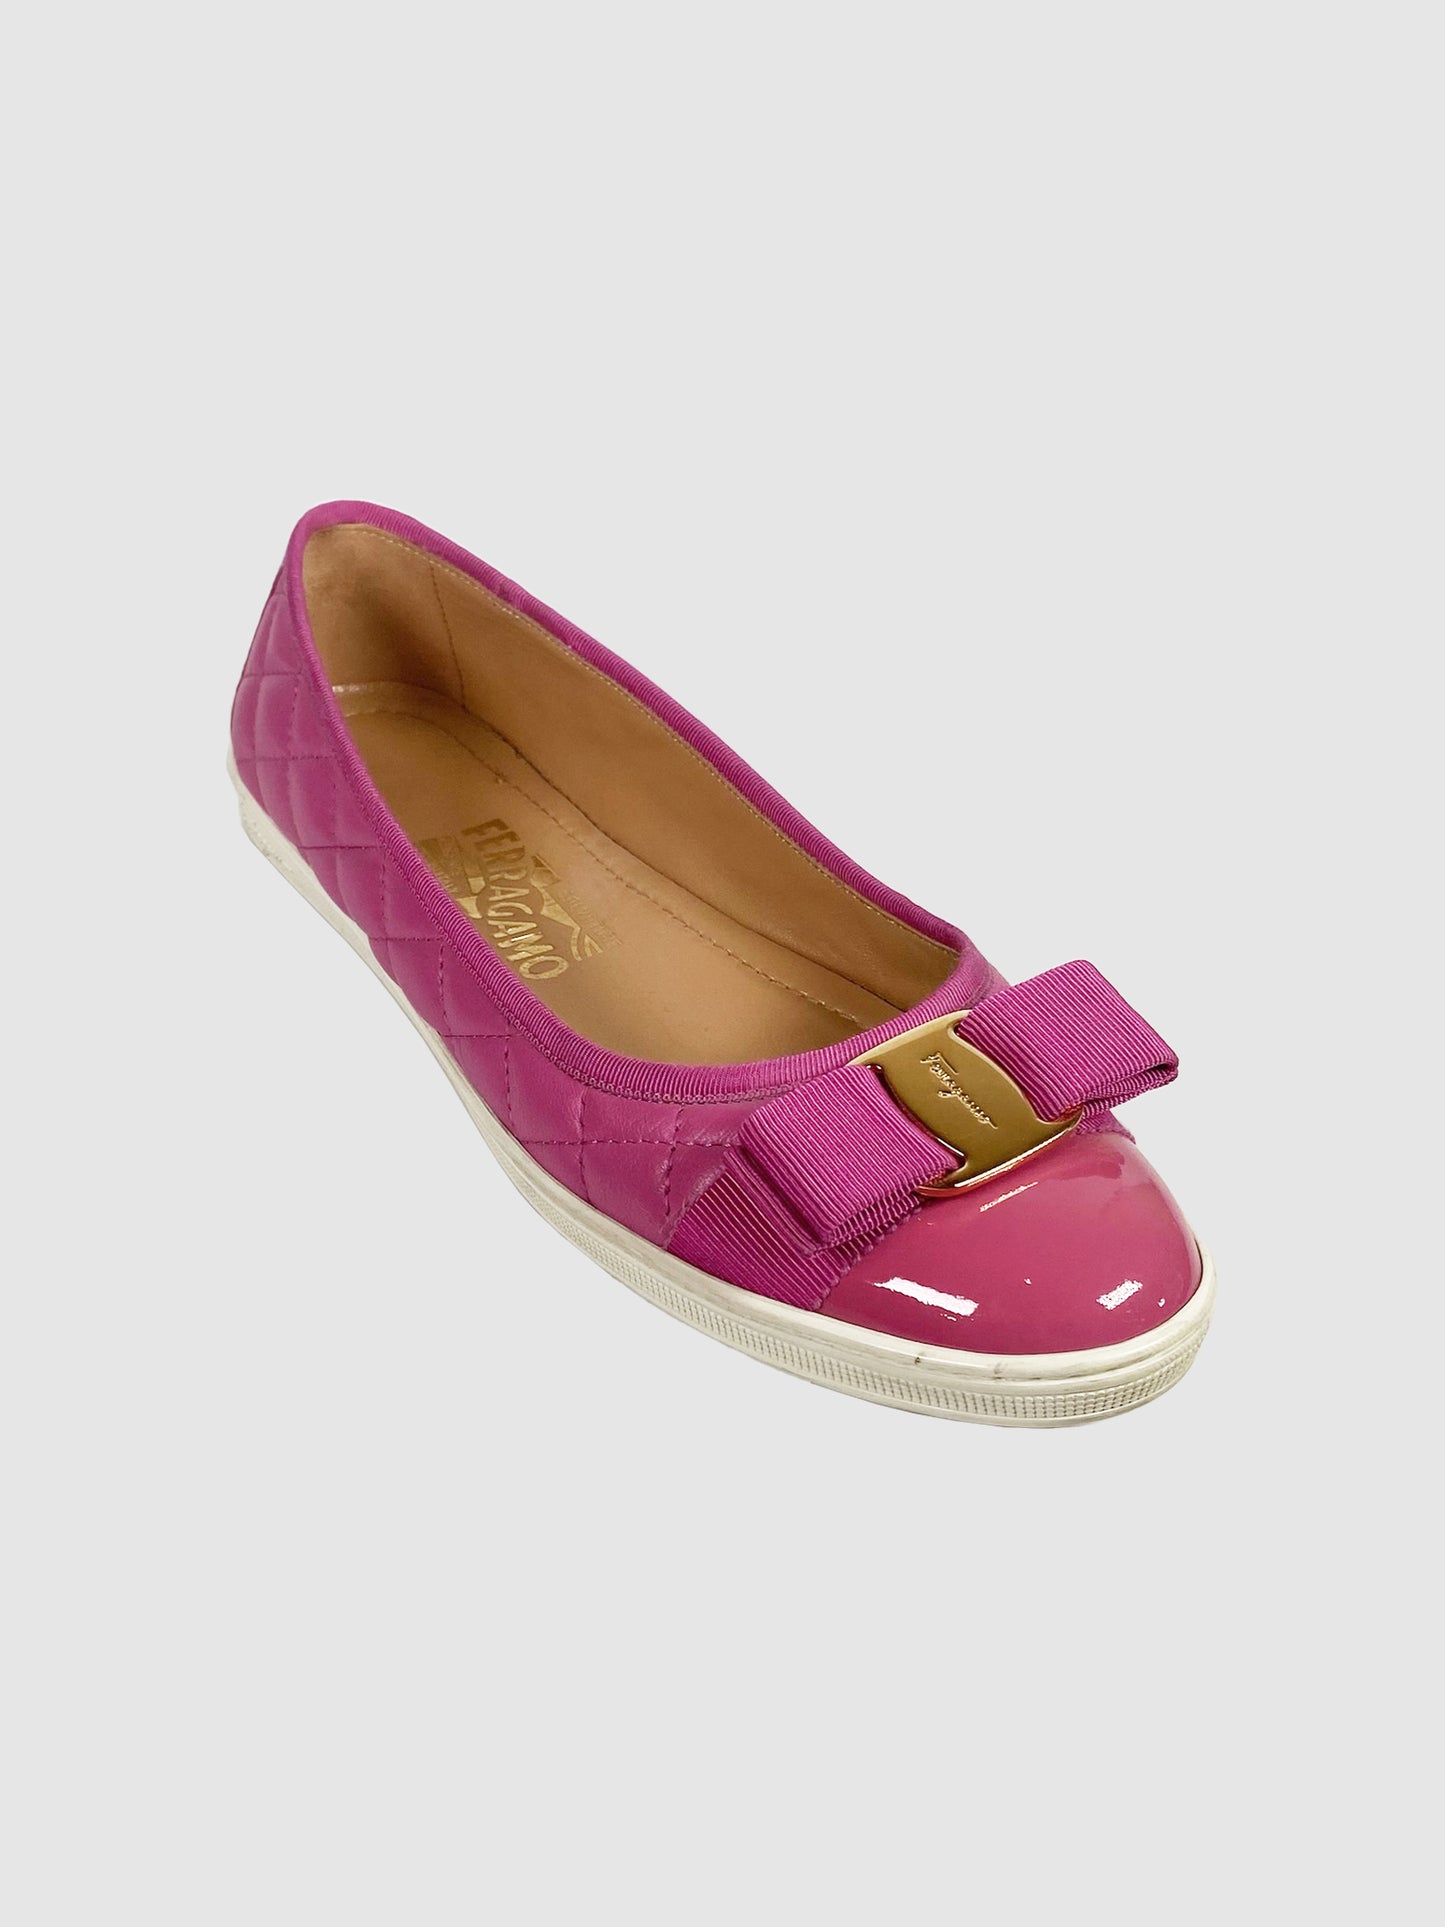 Patent Quilted Leather Flats - Size 7